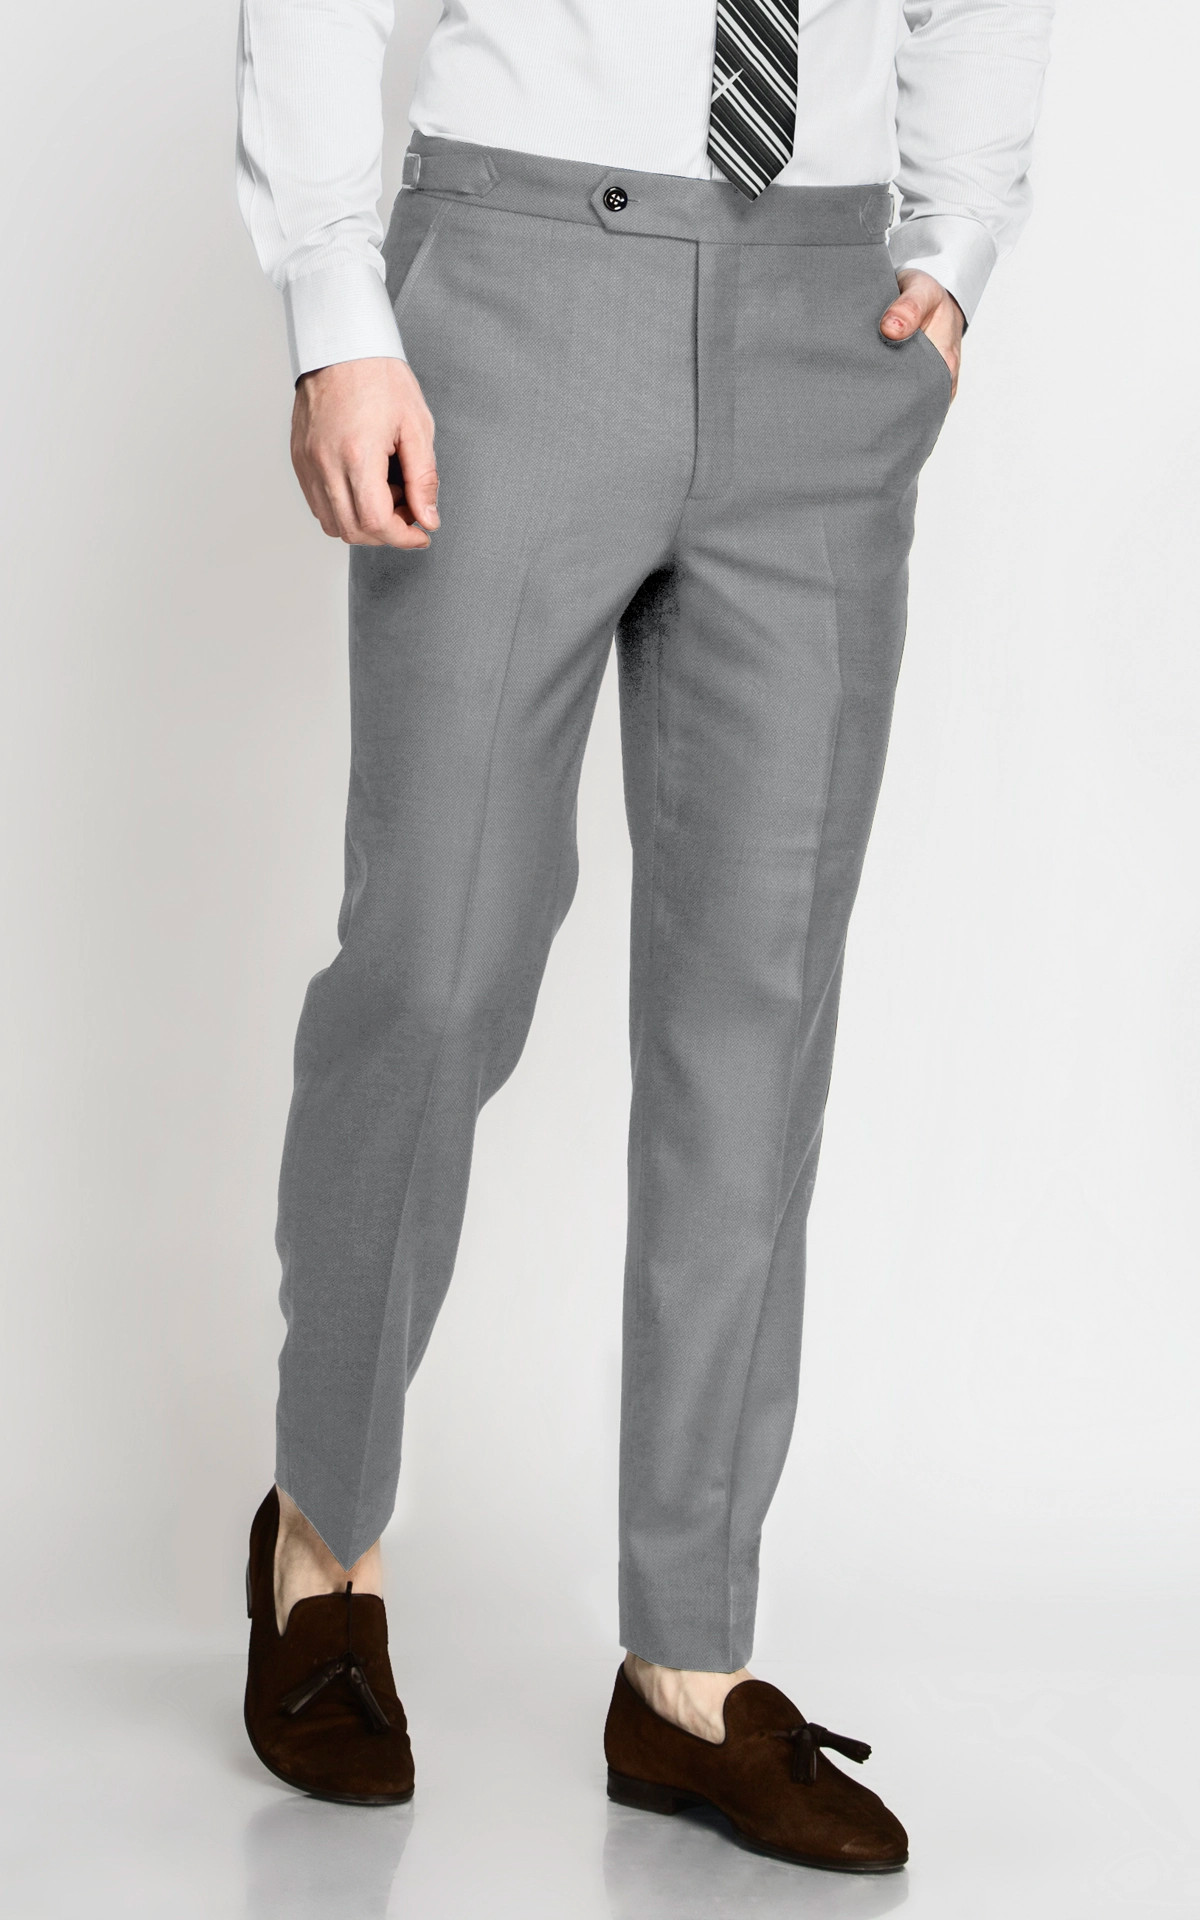 Grey Textured Weave Wool Stretch Dress Pant - Custom Fit Tailored Clothing